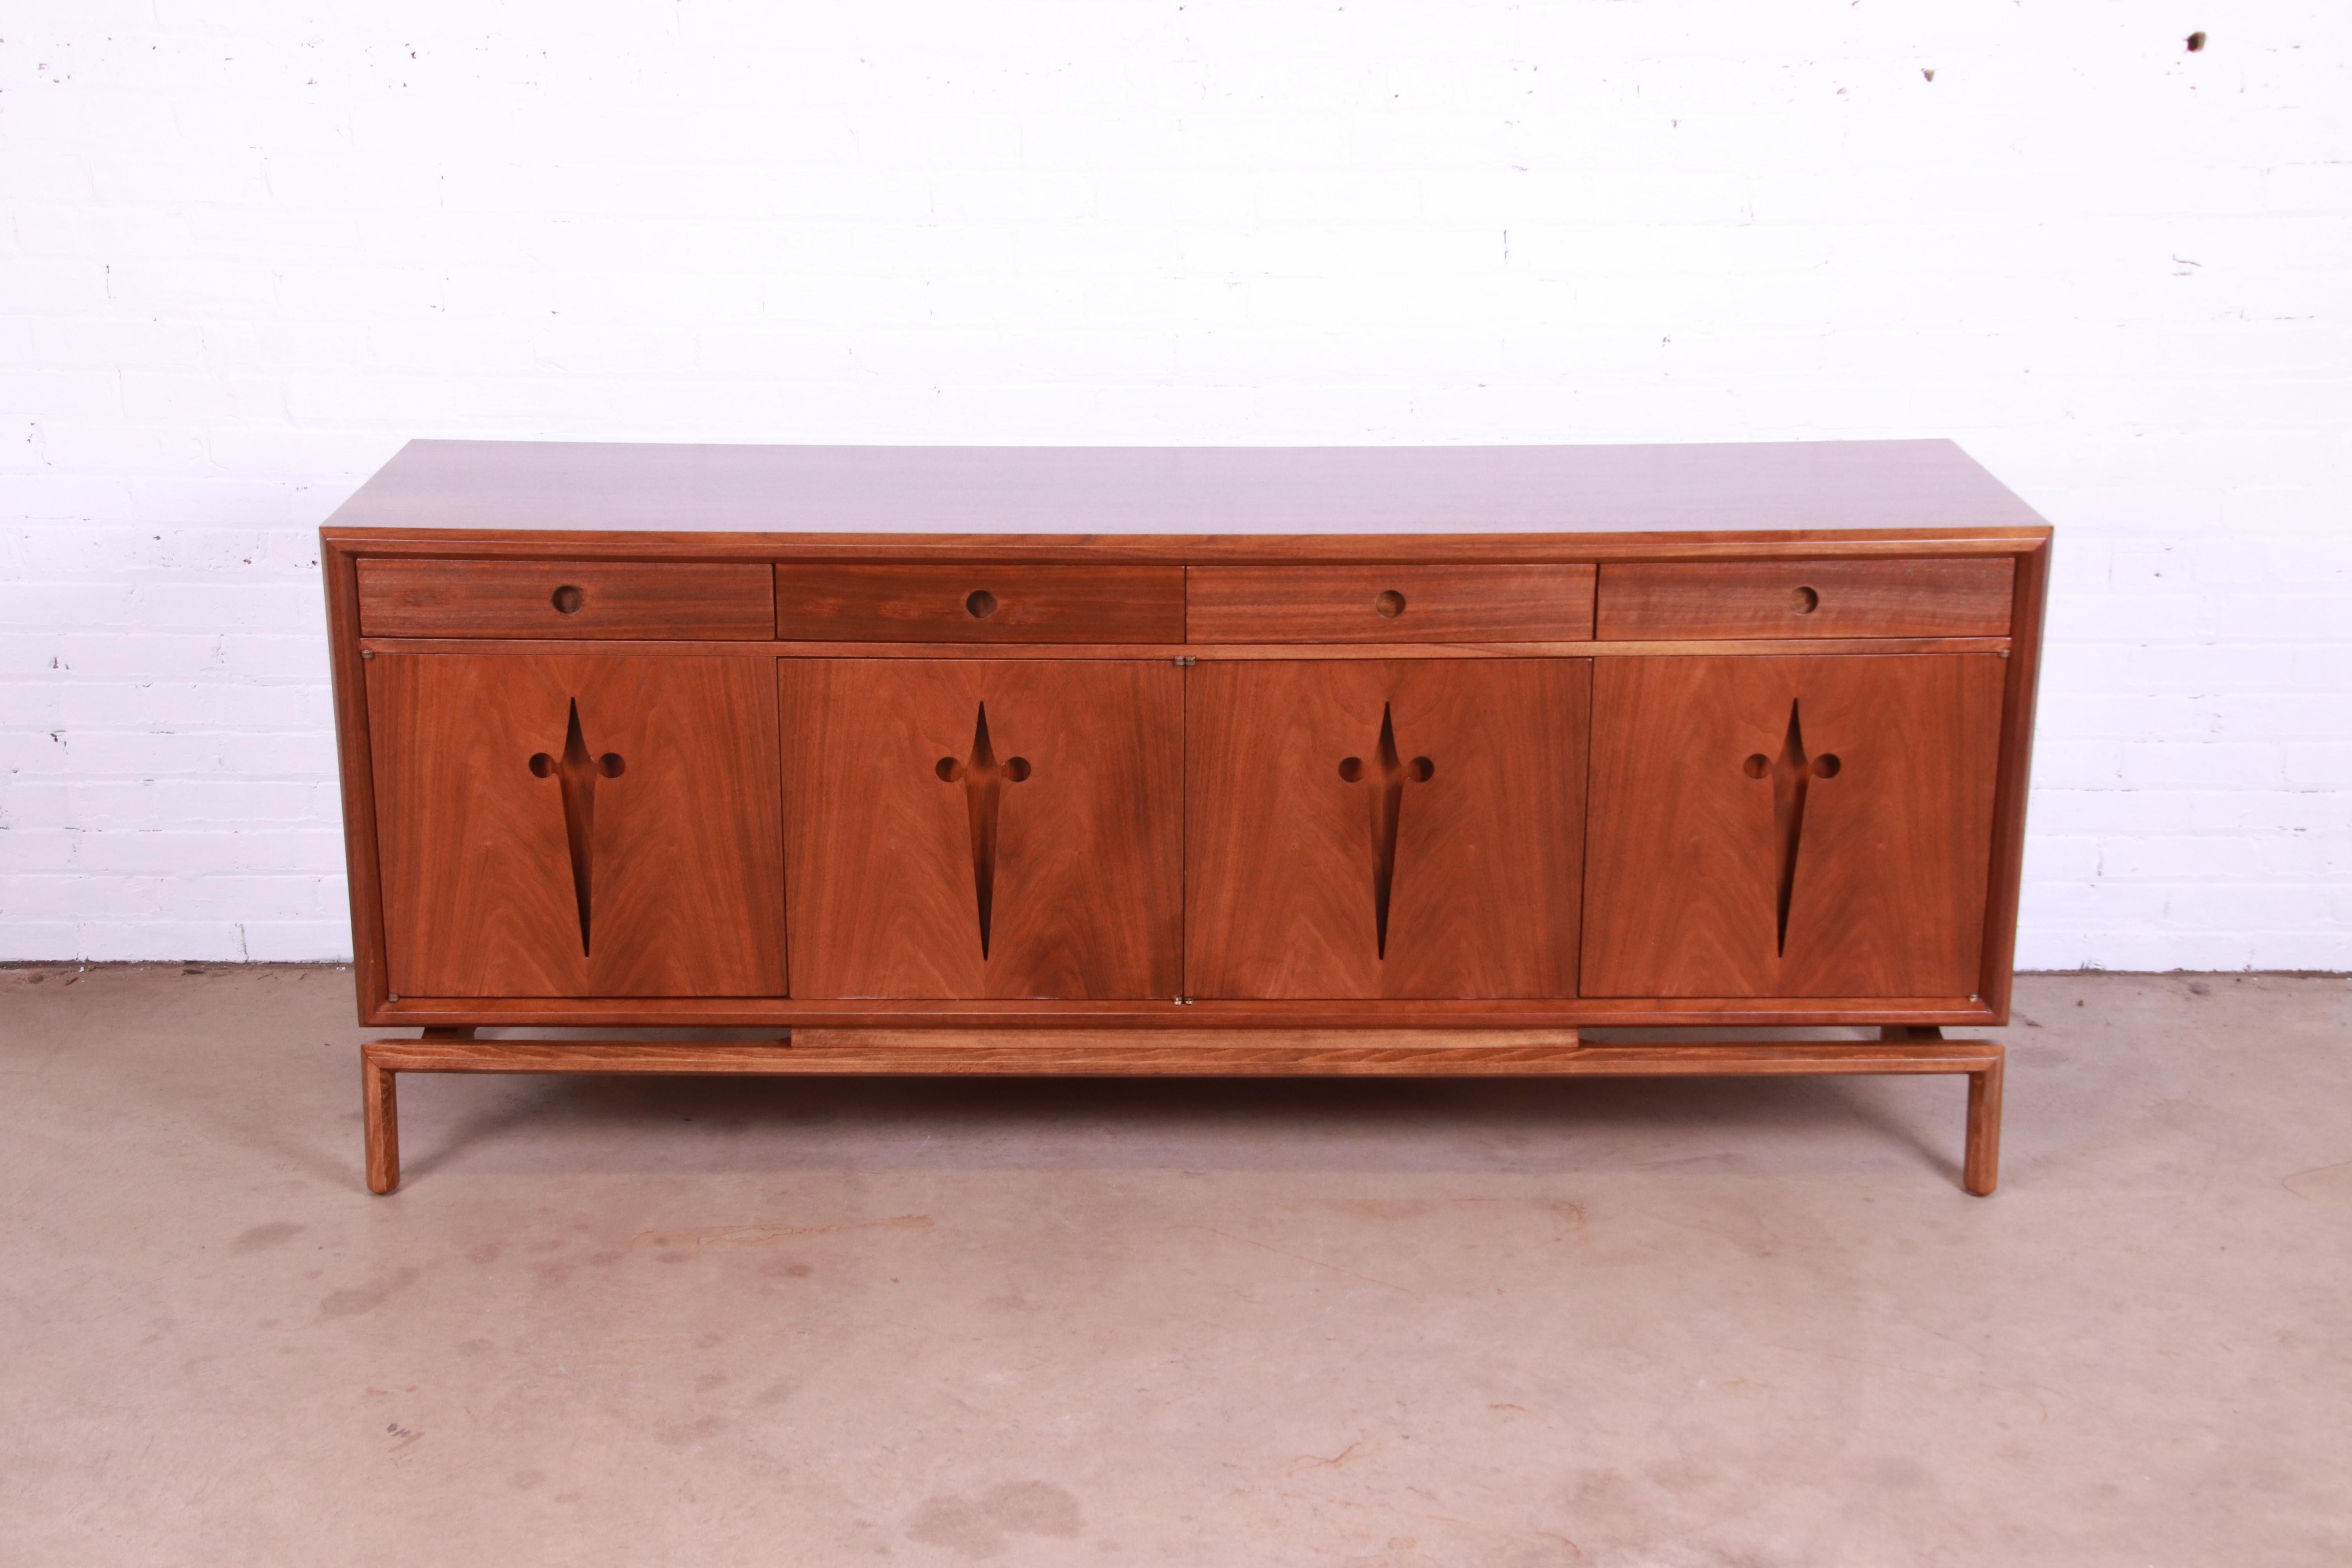 An exceptional mid-century Swedish Modern walnut sideboard, credenza, or bar cabinet

By Edmond J. Spence

Sweden, 1950s

Measures: 74.75